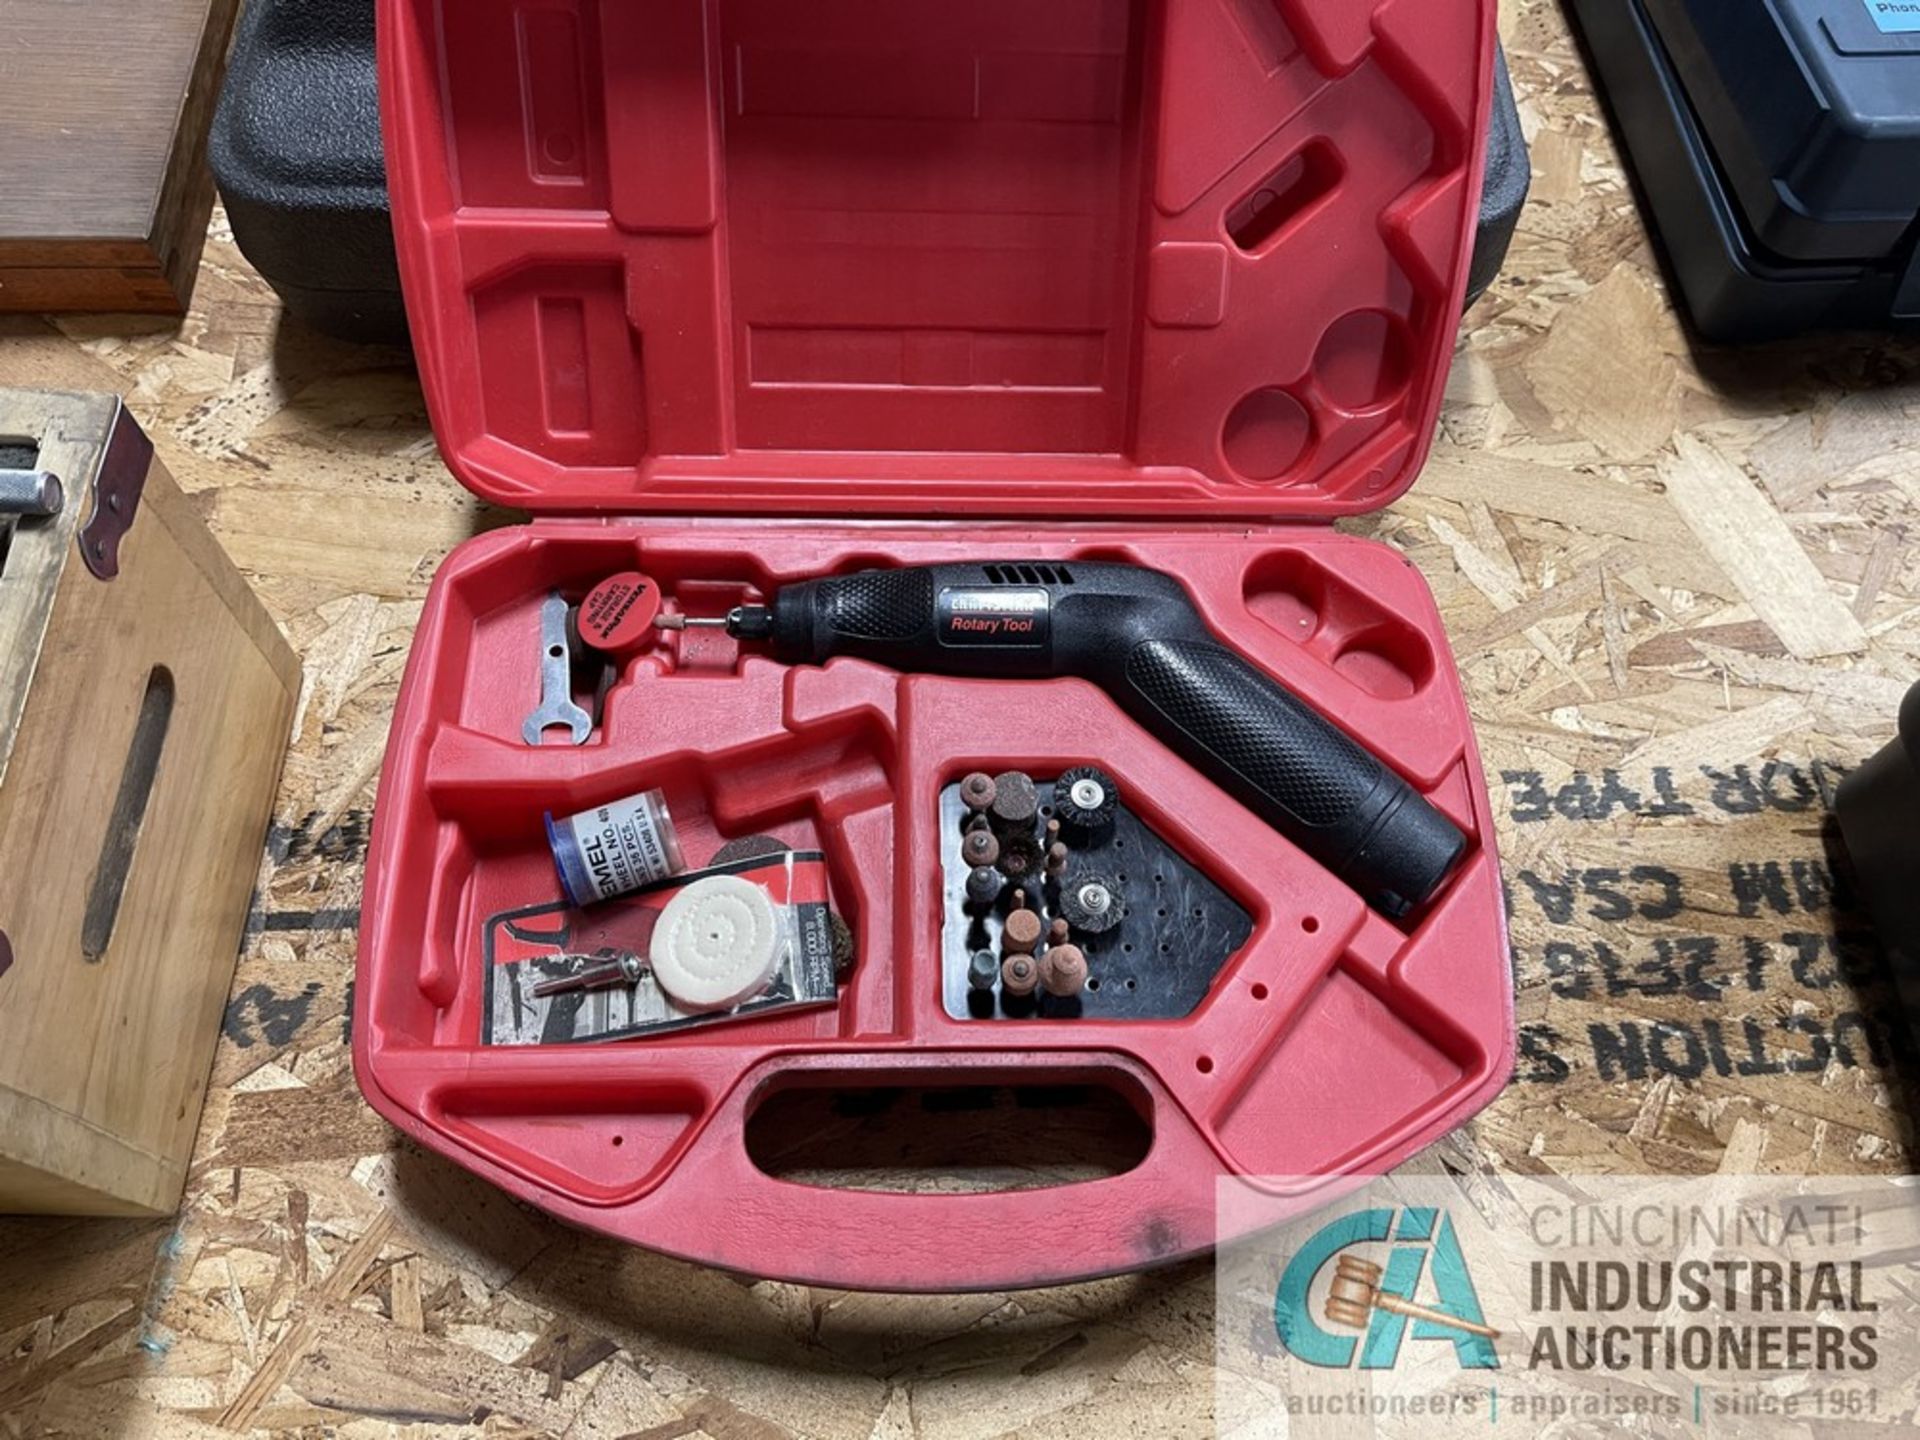 (LOT) TETCH-O-MATIC MARKING SYSTEM AND CRAFTSMAN VERSAPAC CORDLESS ROTARY TOOL - Image 2 of 2